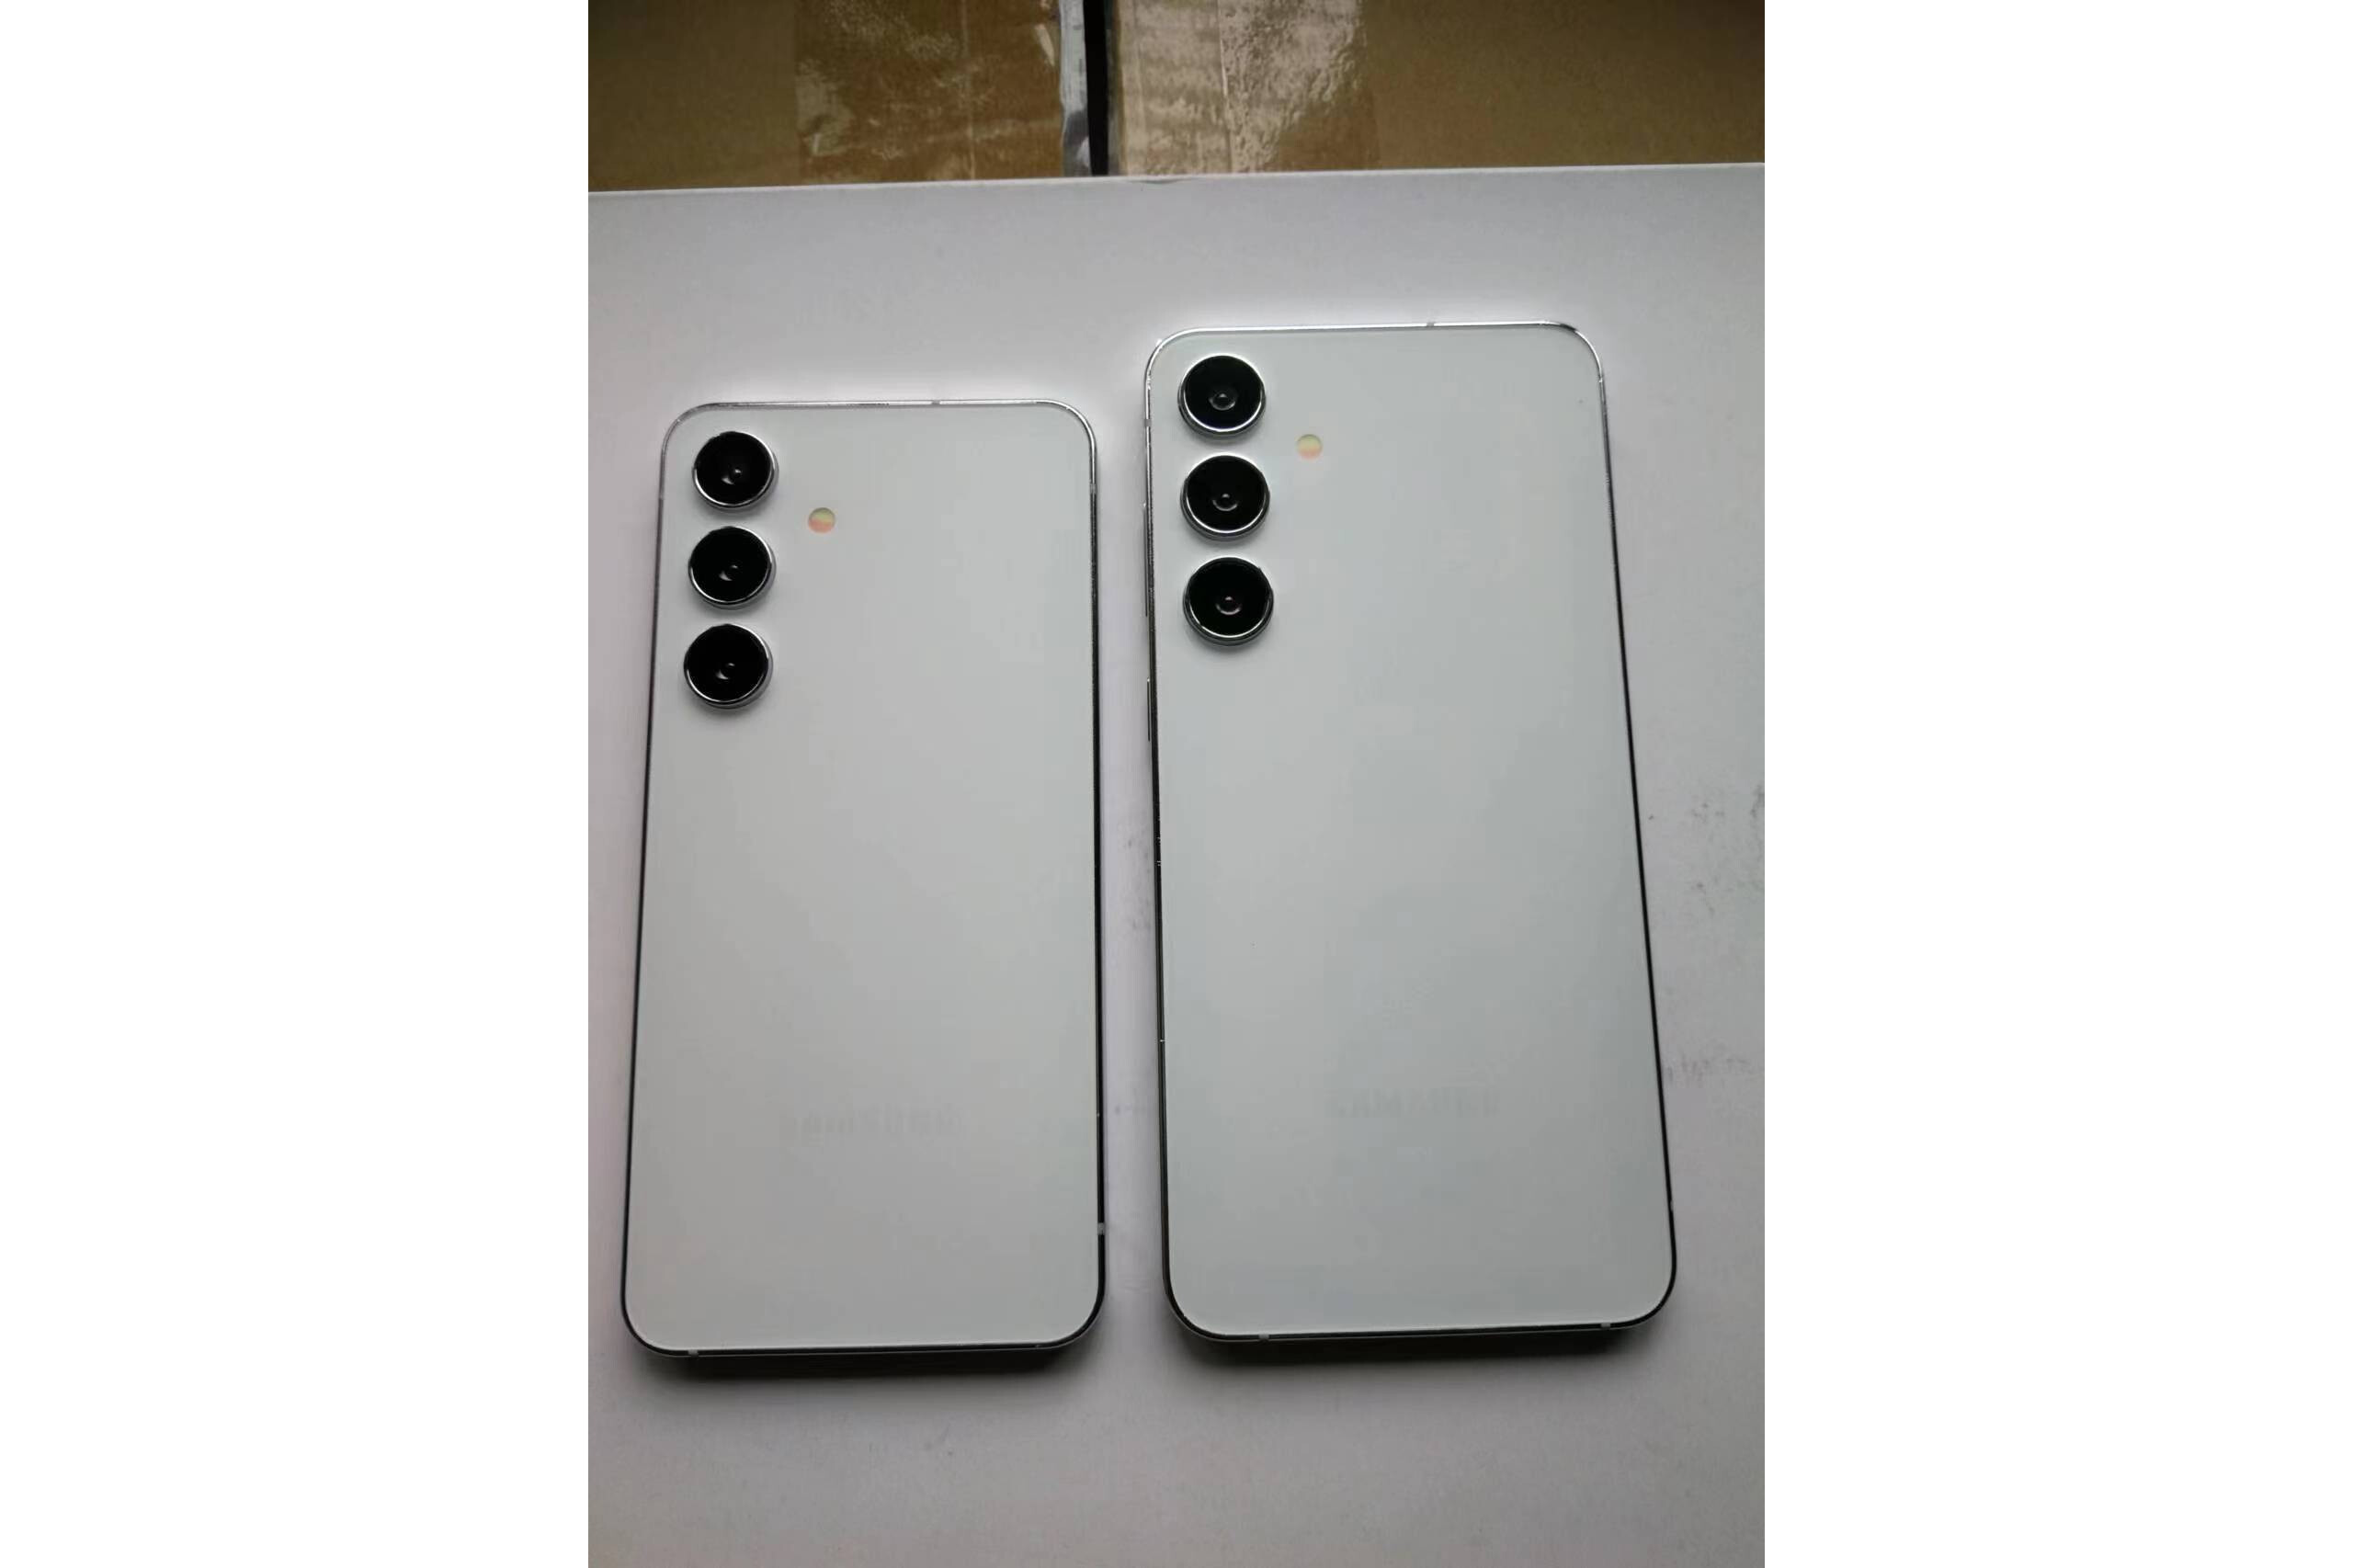 Galaxy S24 vs S24 Plus dummy models - Leak gives first comprehensive look at Galaxy S24 family by way of dummy models